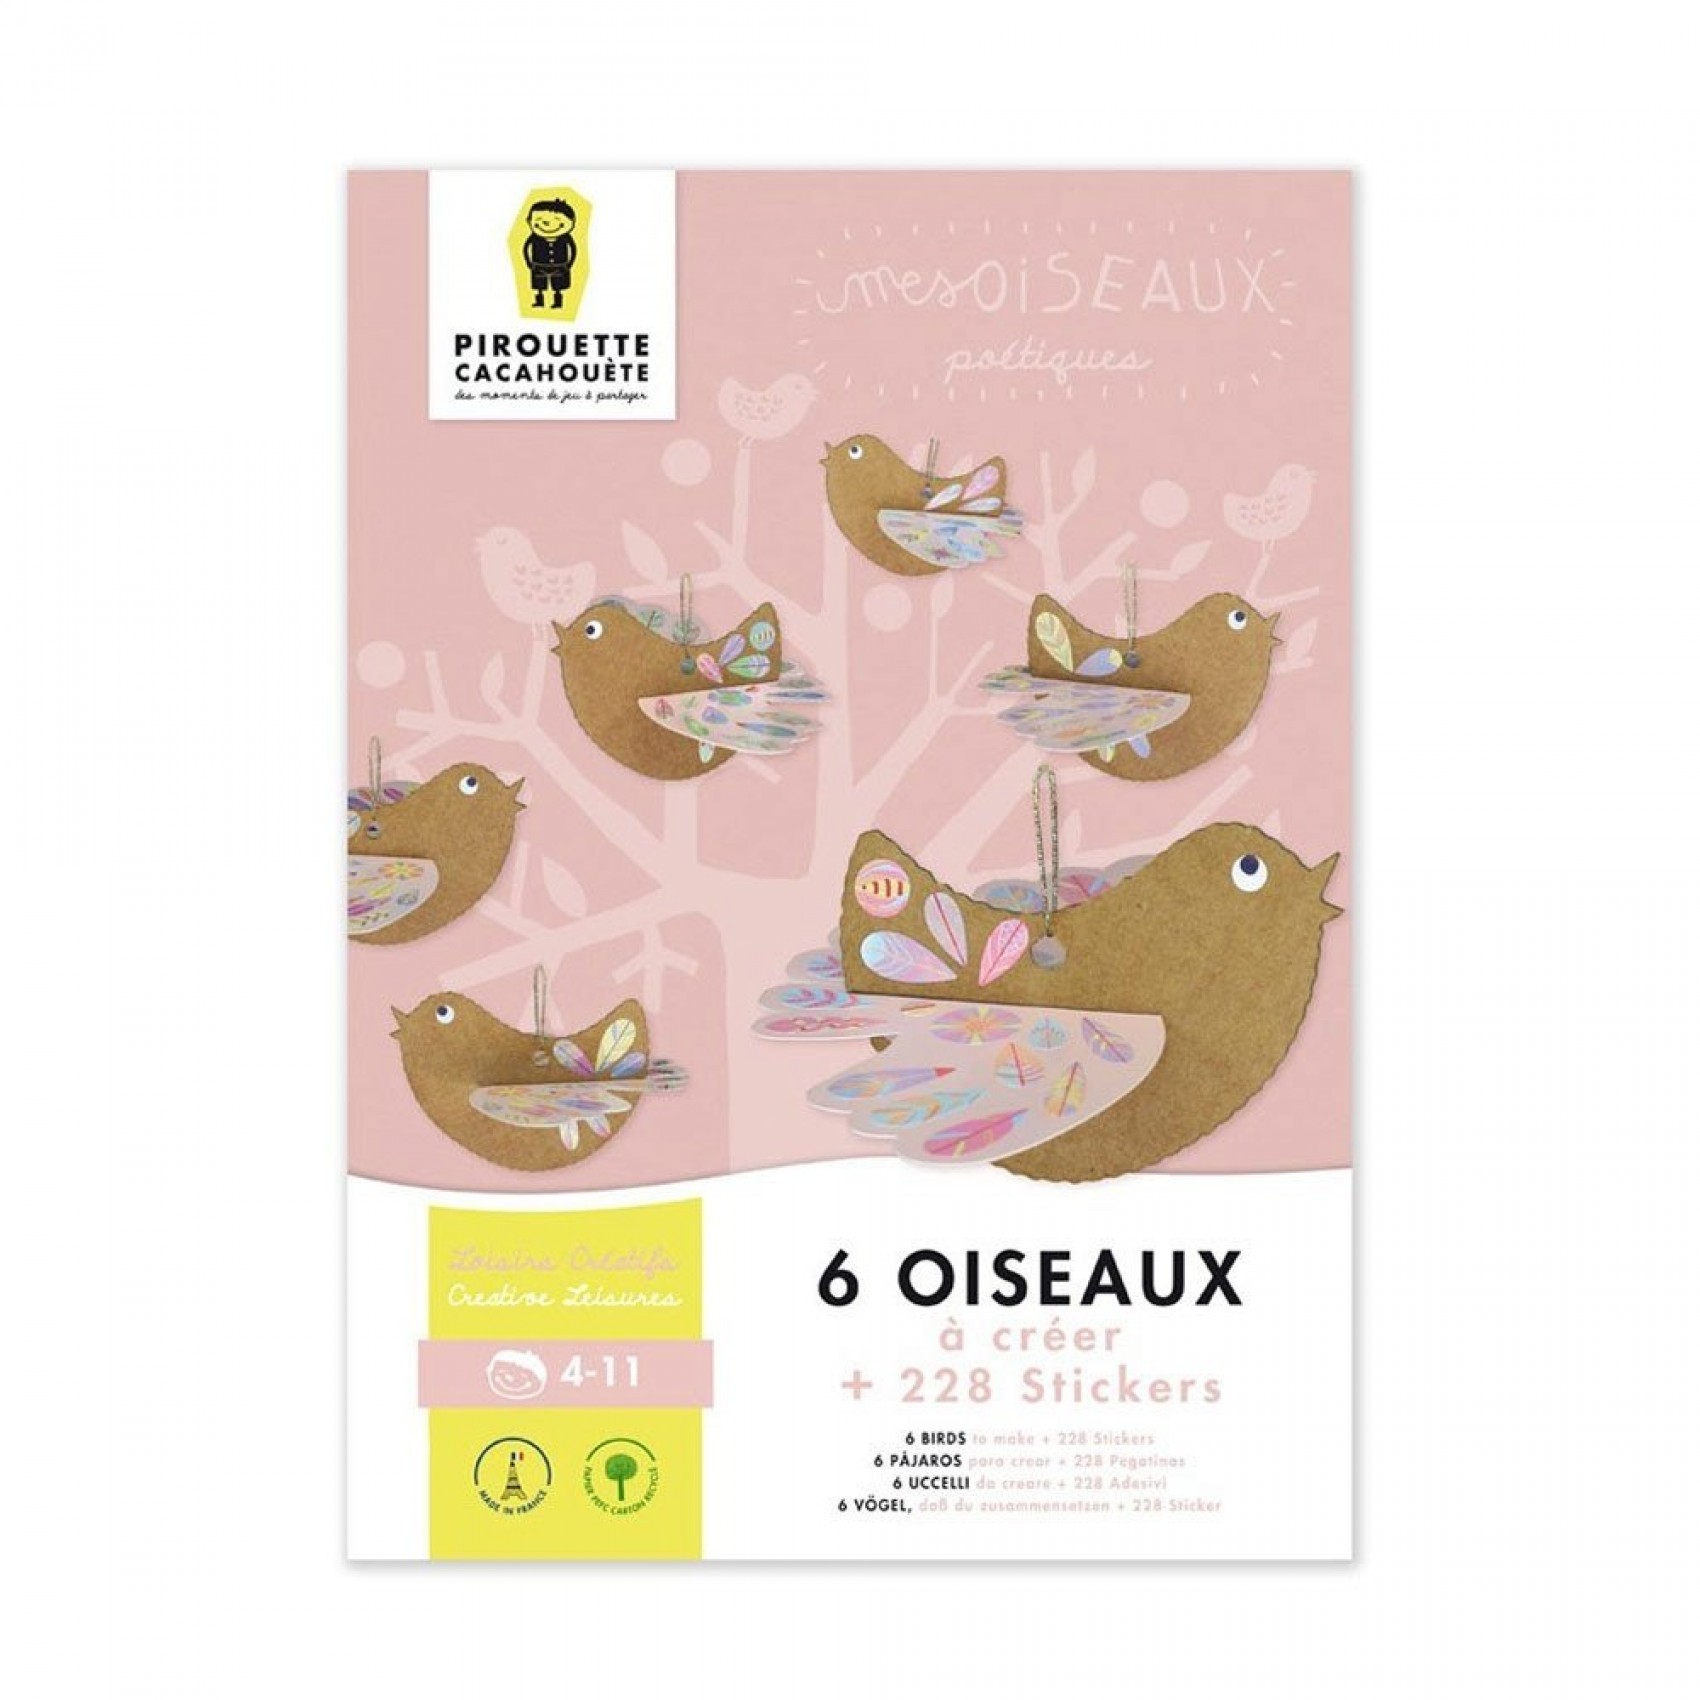 Cartes d'invitation anniversaire Made in France Chat - Pirouette